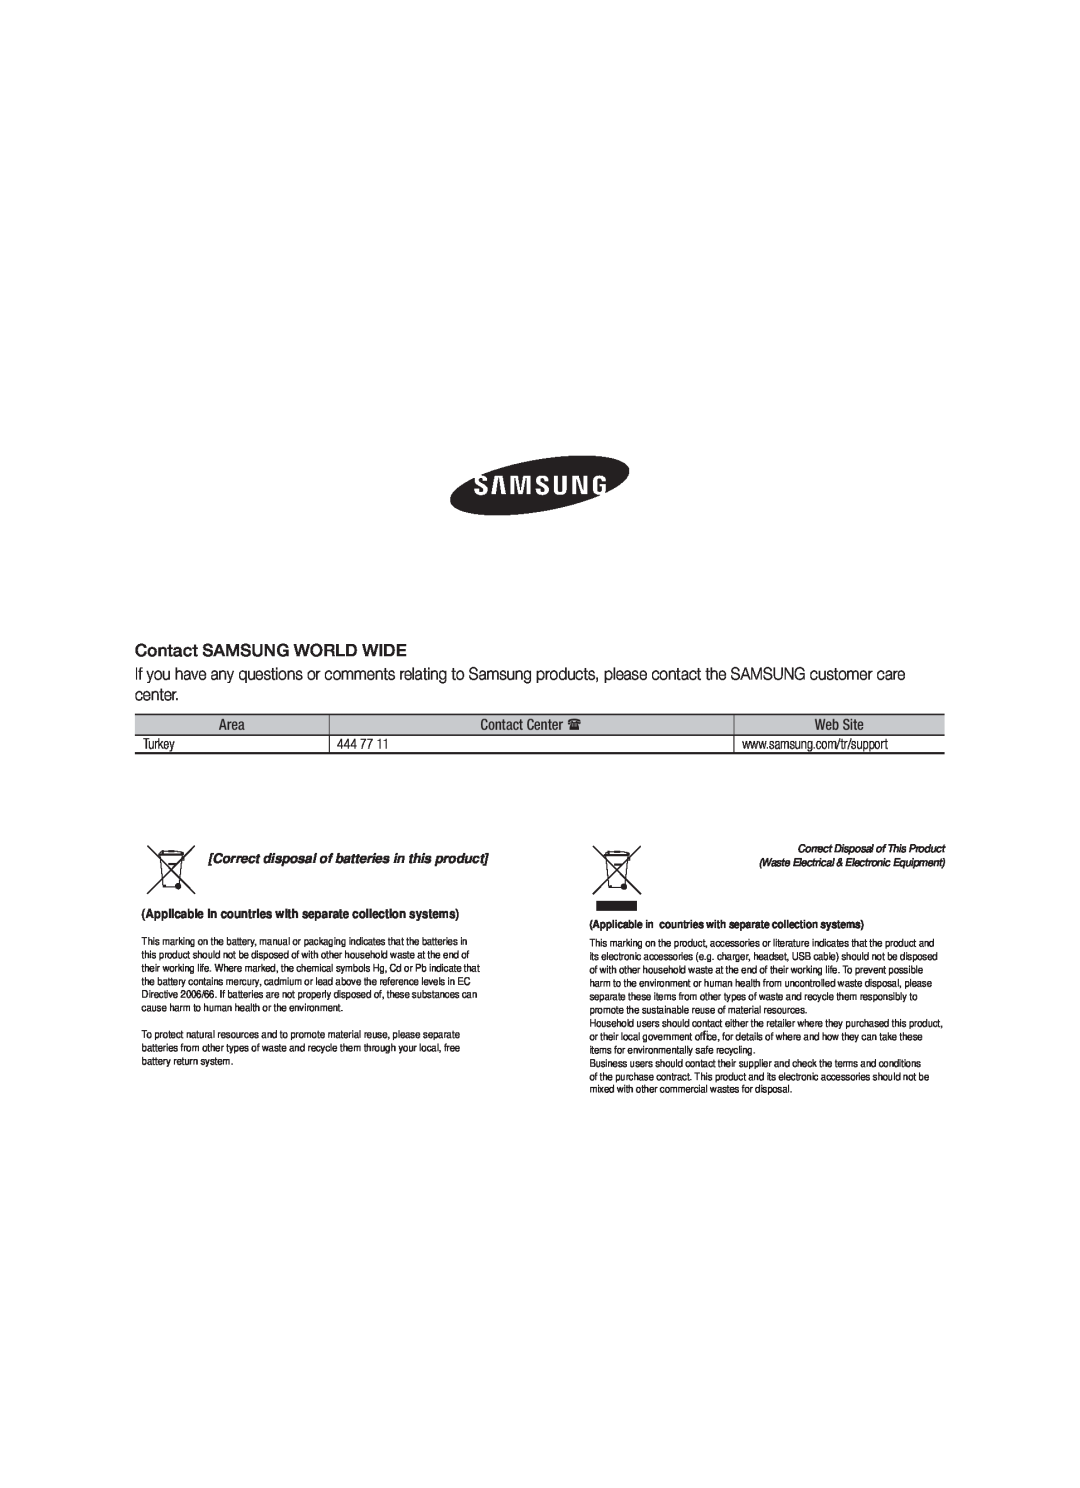 Samsung HW-F751/TK Correct disposal of batteries in this product, Applicable in countries with separate collection systems 